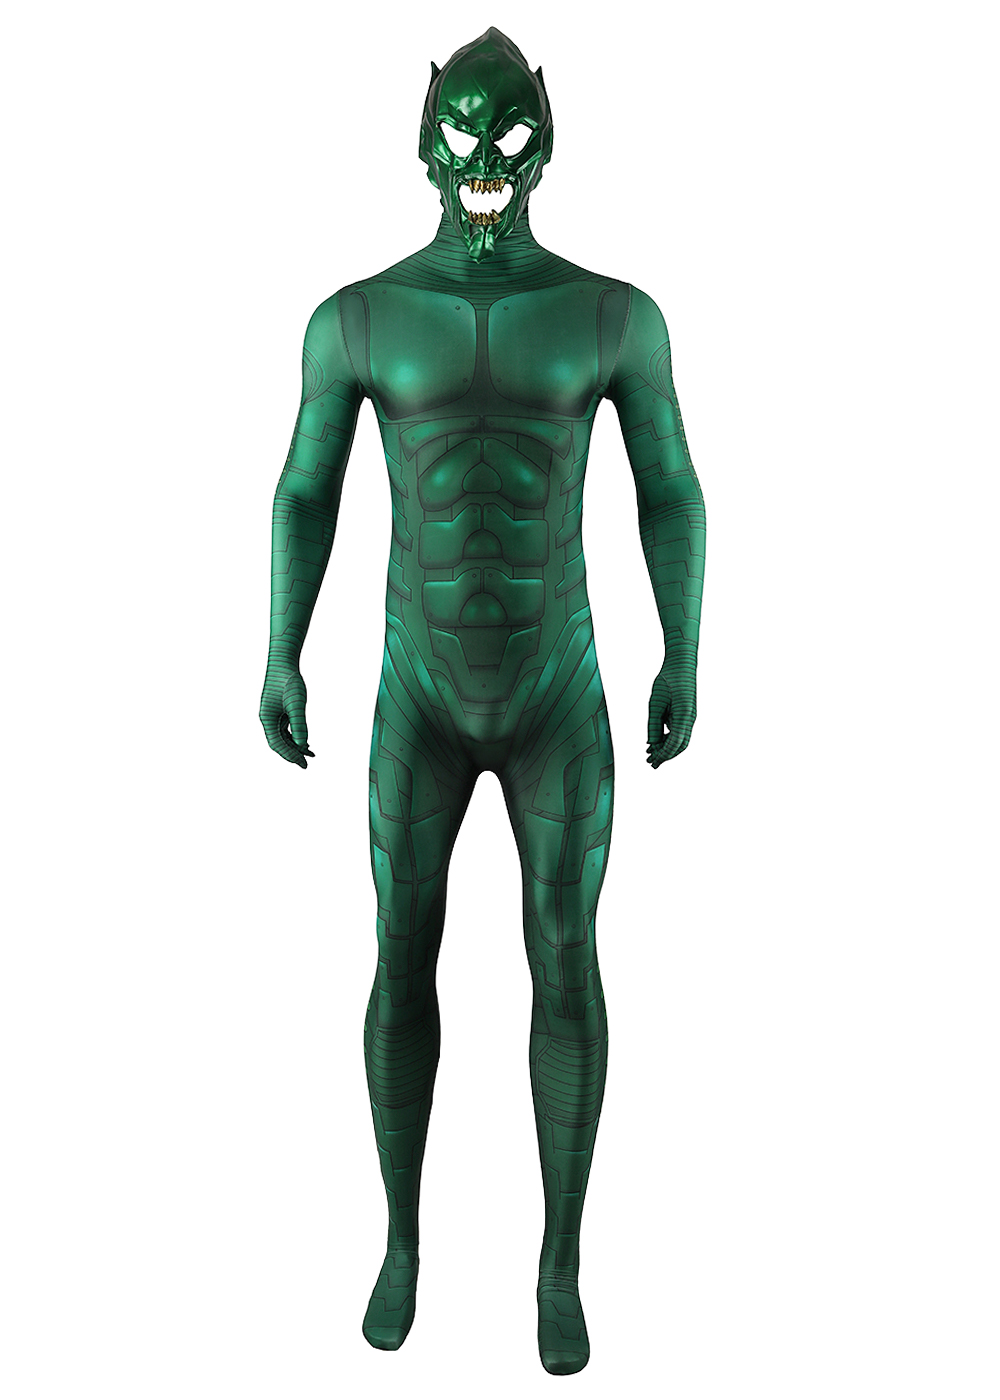 Green Goblin Costume Spider-Man: No Way Home Bodysuit Cosplay for Adult Kids